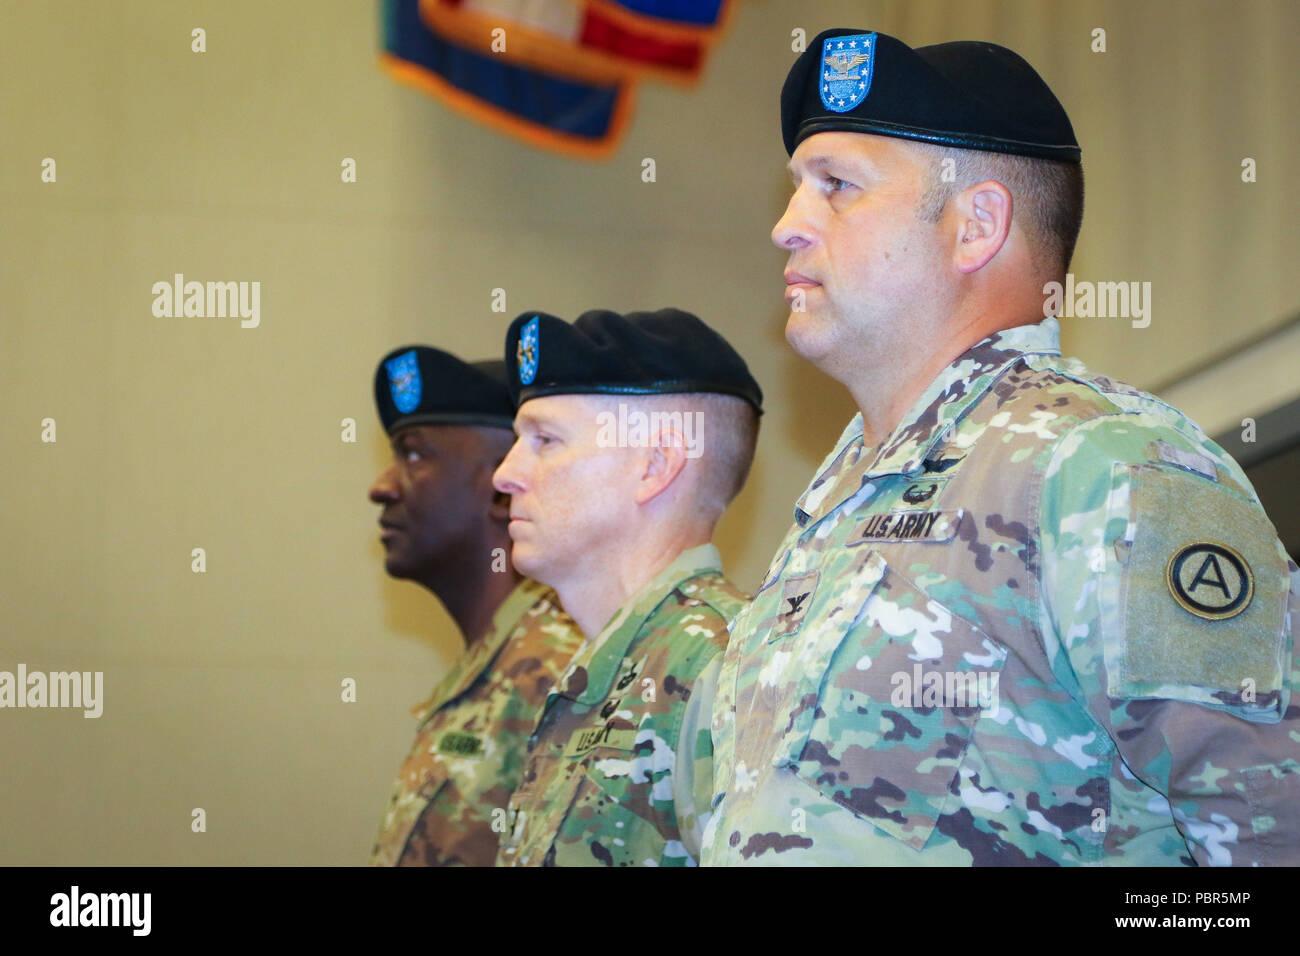 Col. Douglas W. Mills, incoming commander of the 2503rd Digital Liaison Detachment, Maj. Gen. David C. Hill, deputy commanding general, U.S. Army Central, and Col. Oscar W. Doward Jr., outgoing commander of the 2503rd DLD, stand at attention during a change-of-command ceremony July 19, 2018, at Patton Hall on Shaw Air Force Base, S.C. (U.S. Army photo by Sgt. Von Marie Donato) Stock Photo